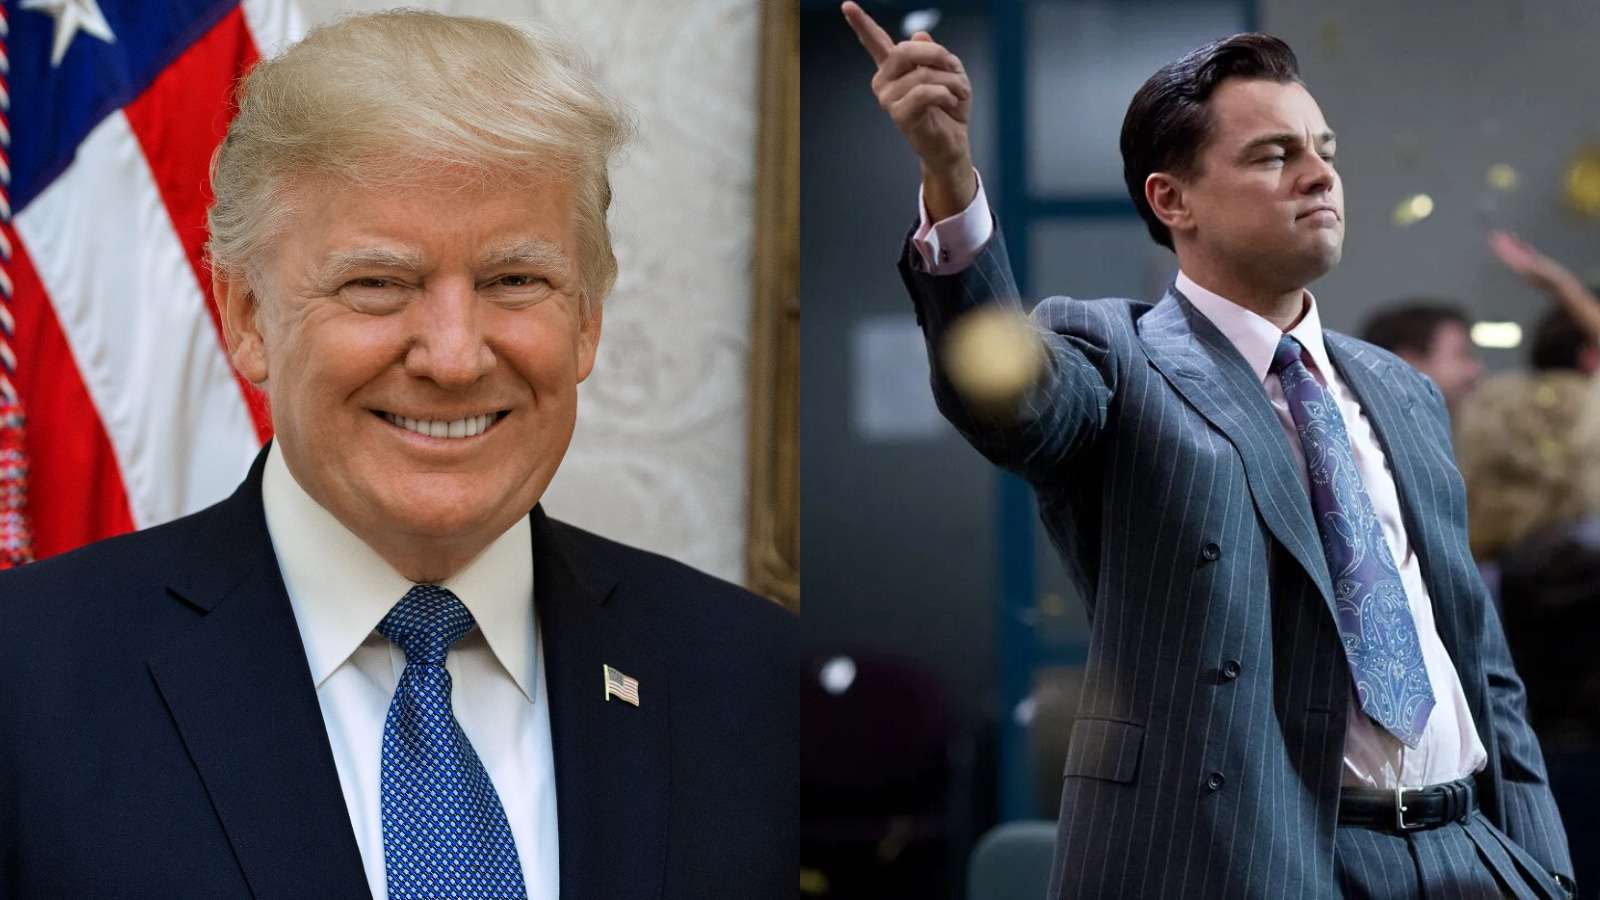 Donald Trump and Leonardo DiCaprio in The Wolf of Wall Street